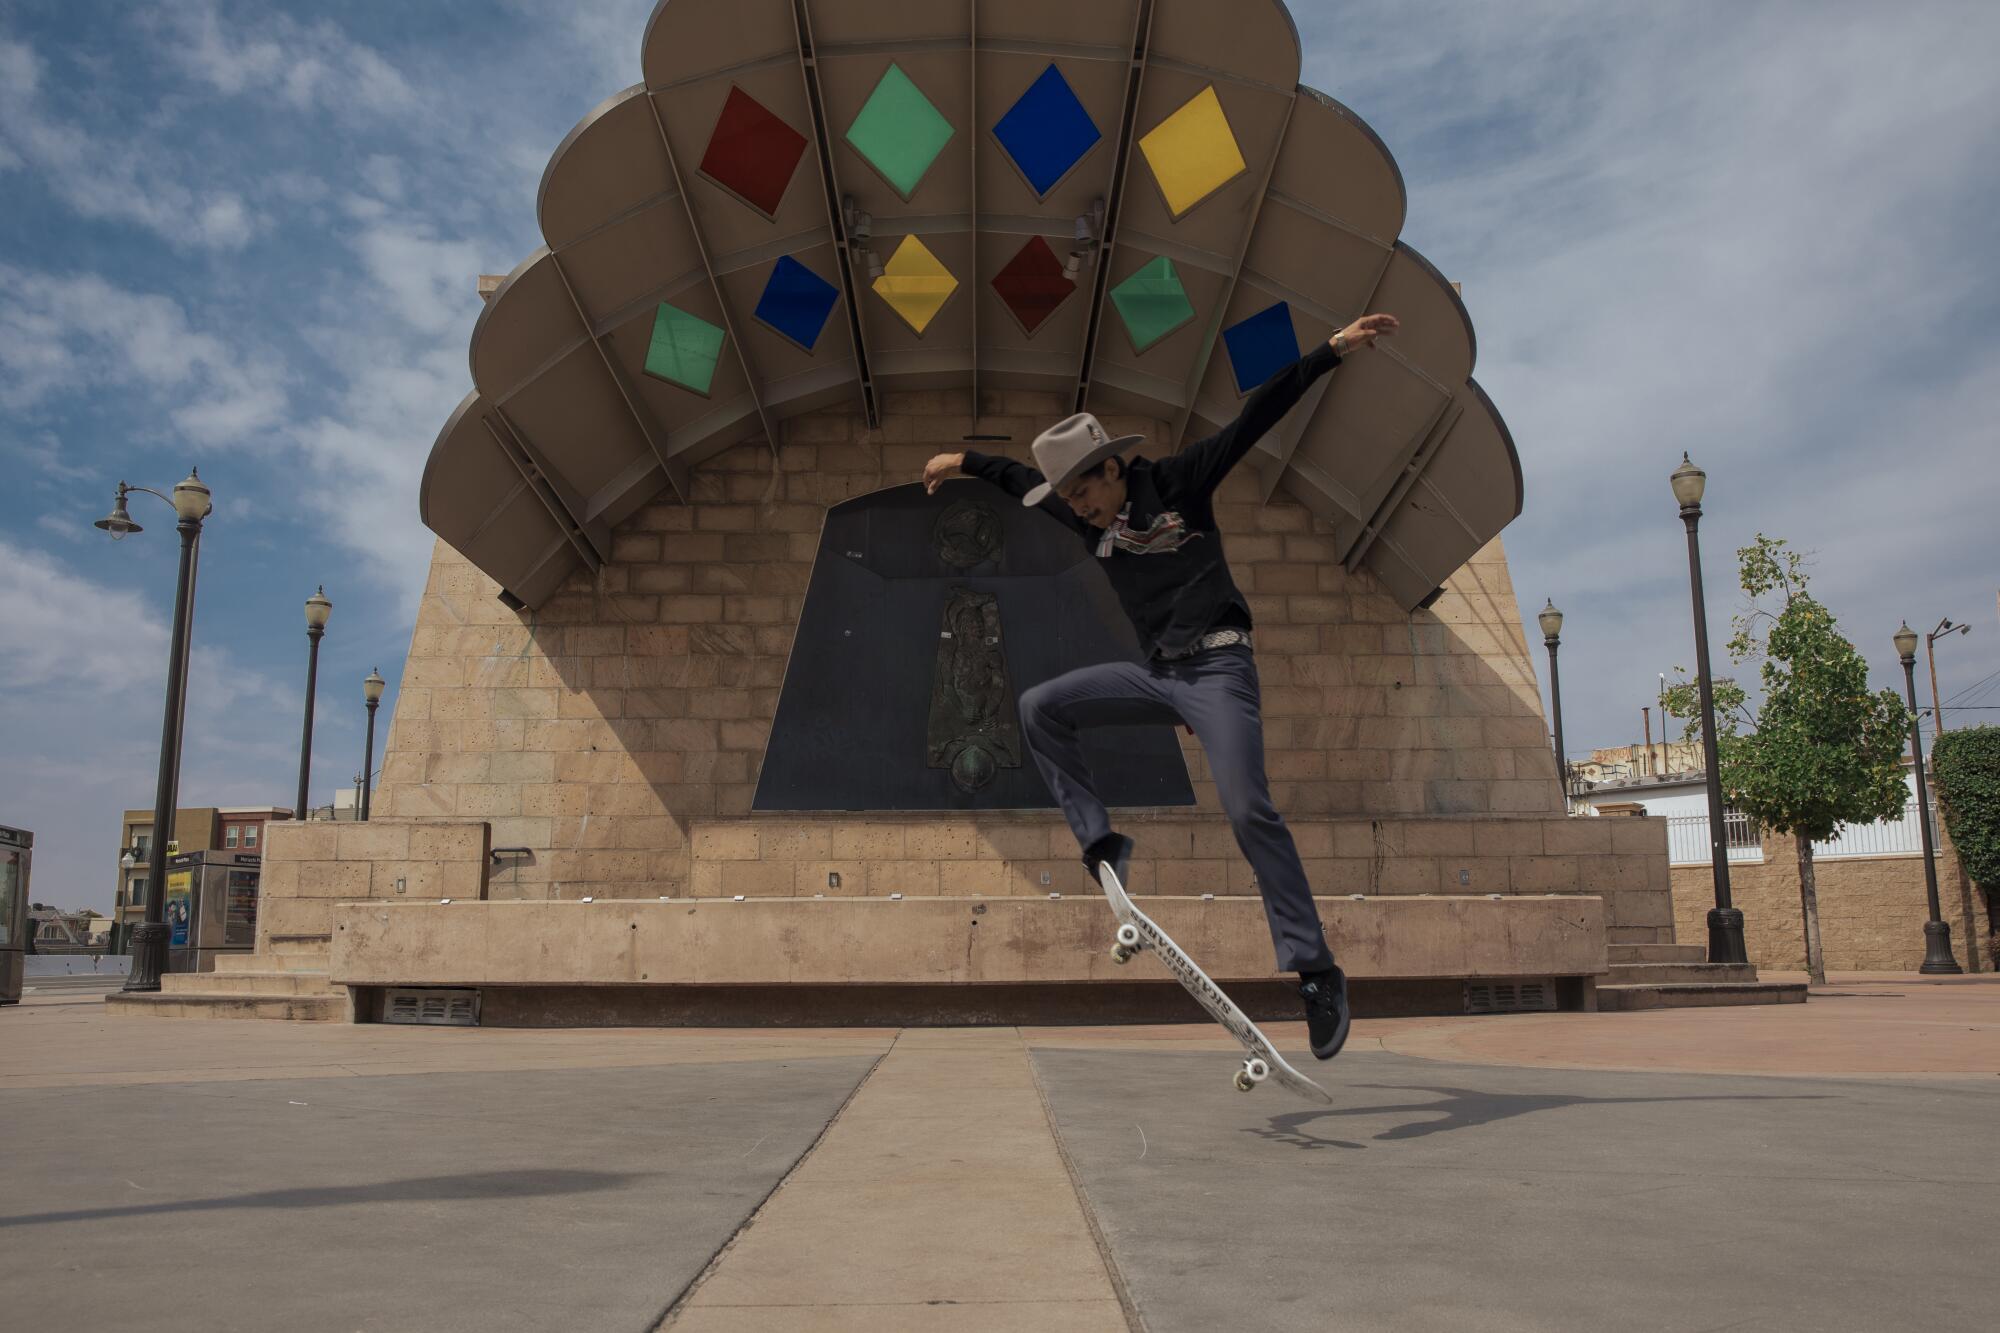 Steve Corona, 31, wears ranchero style clothing while skating at Mariachi Plaza in Boyle Heights on September 23, 2023.